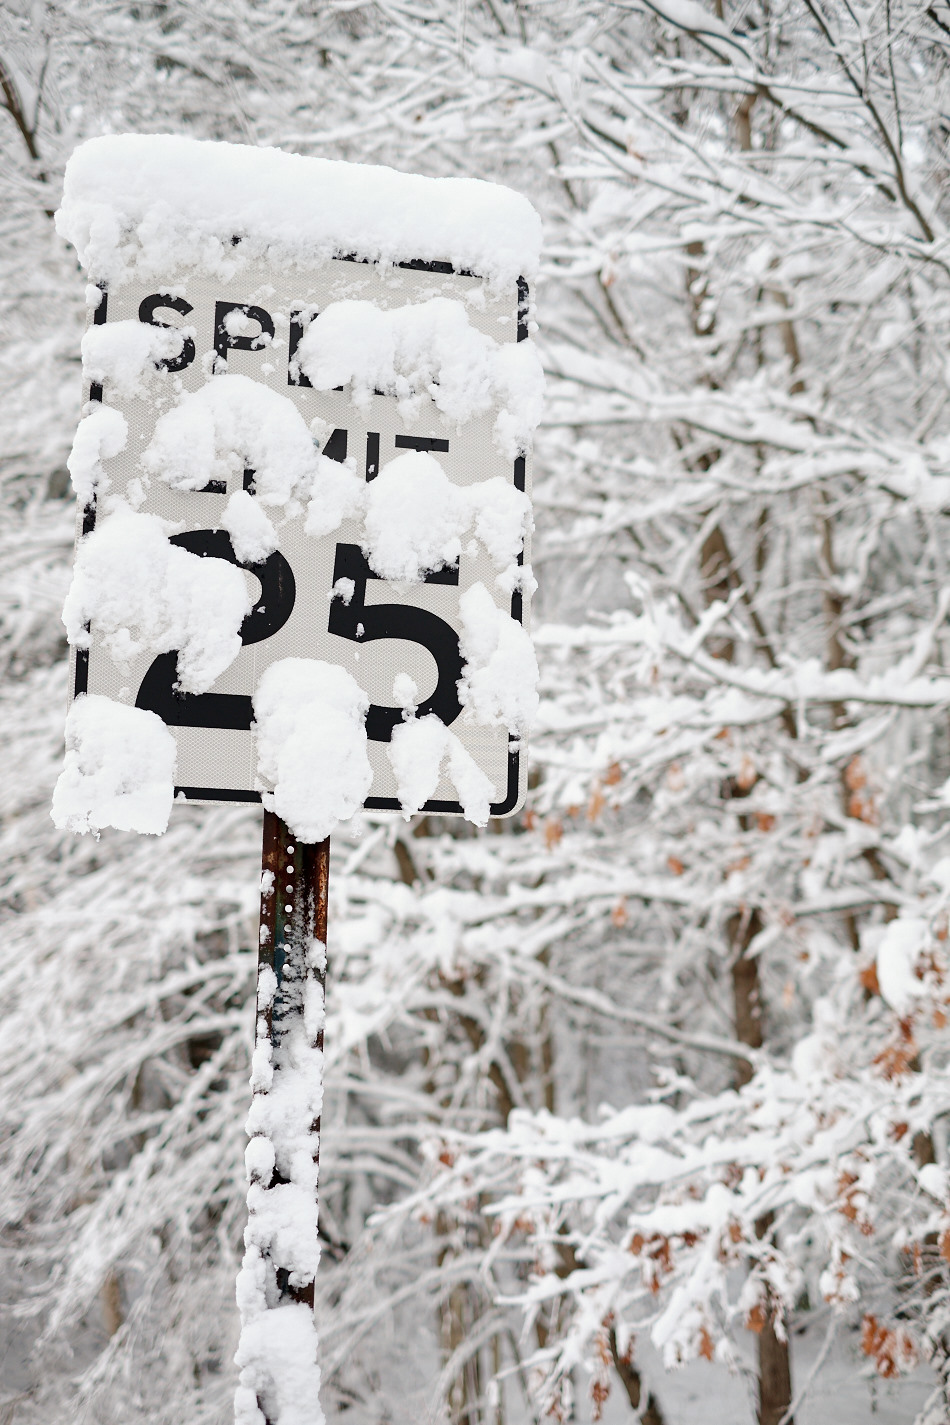 Color photo of a snow-plastered speed limit sign